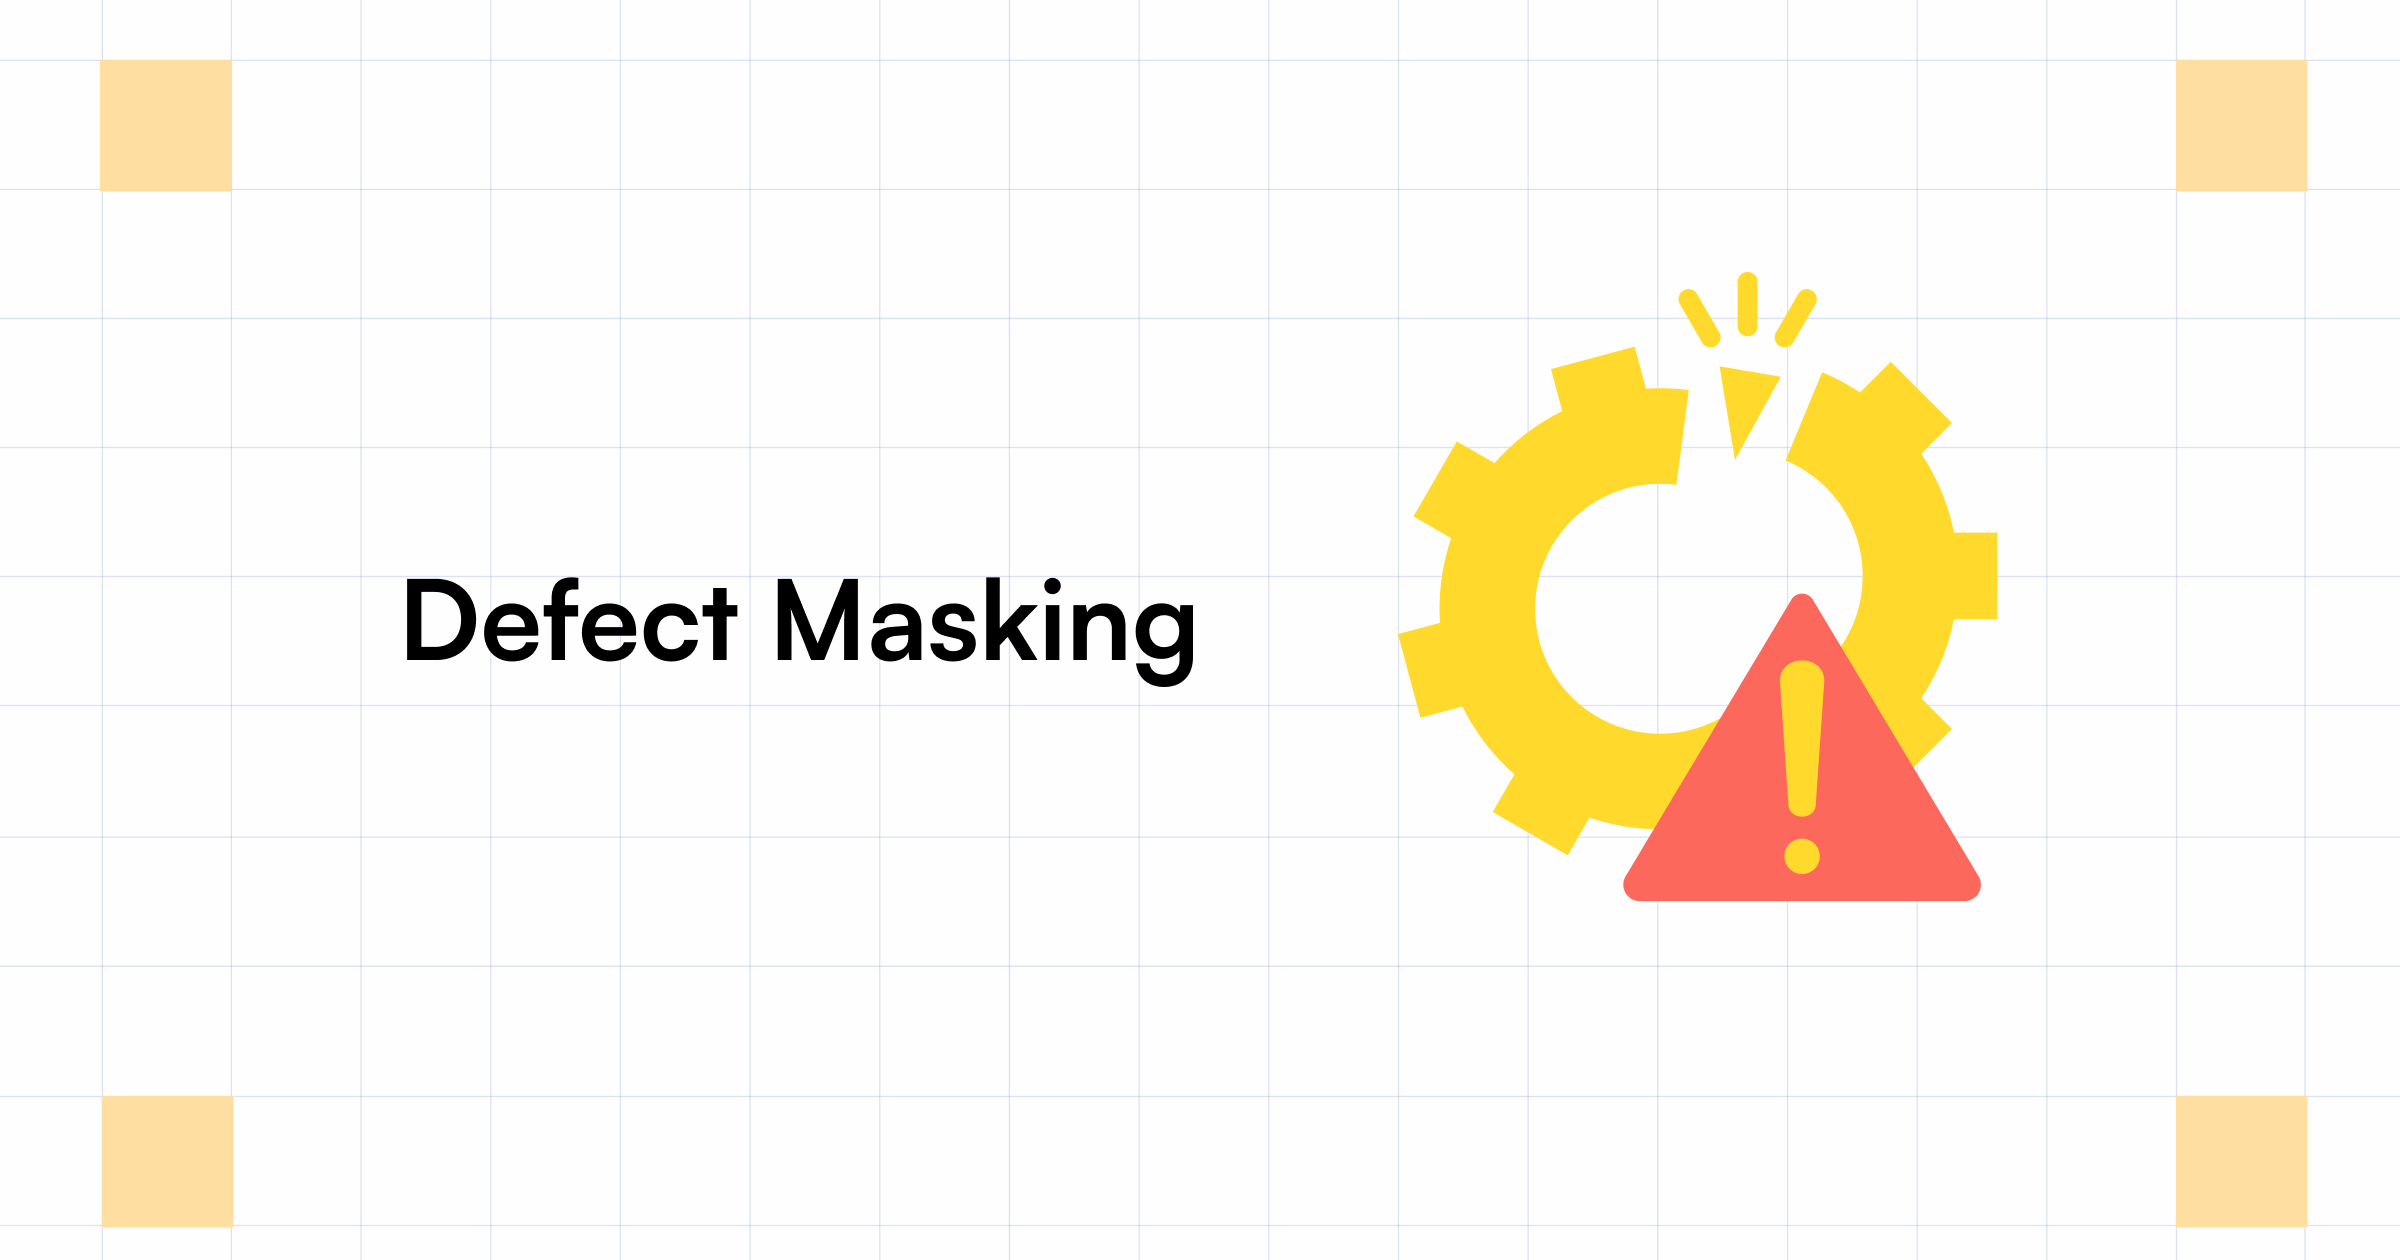 Defect Masking in Software Testing What it is & Why it Matters